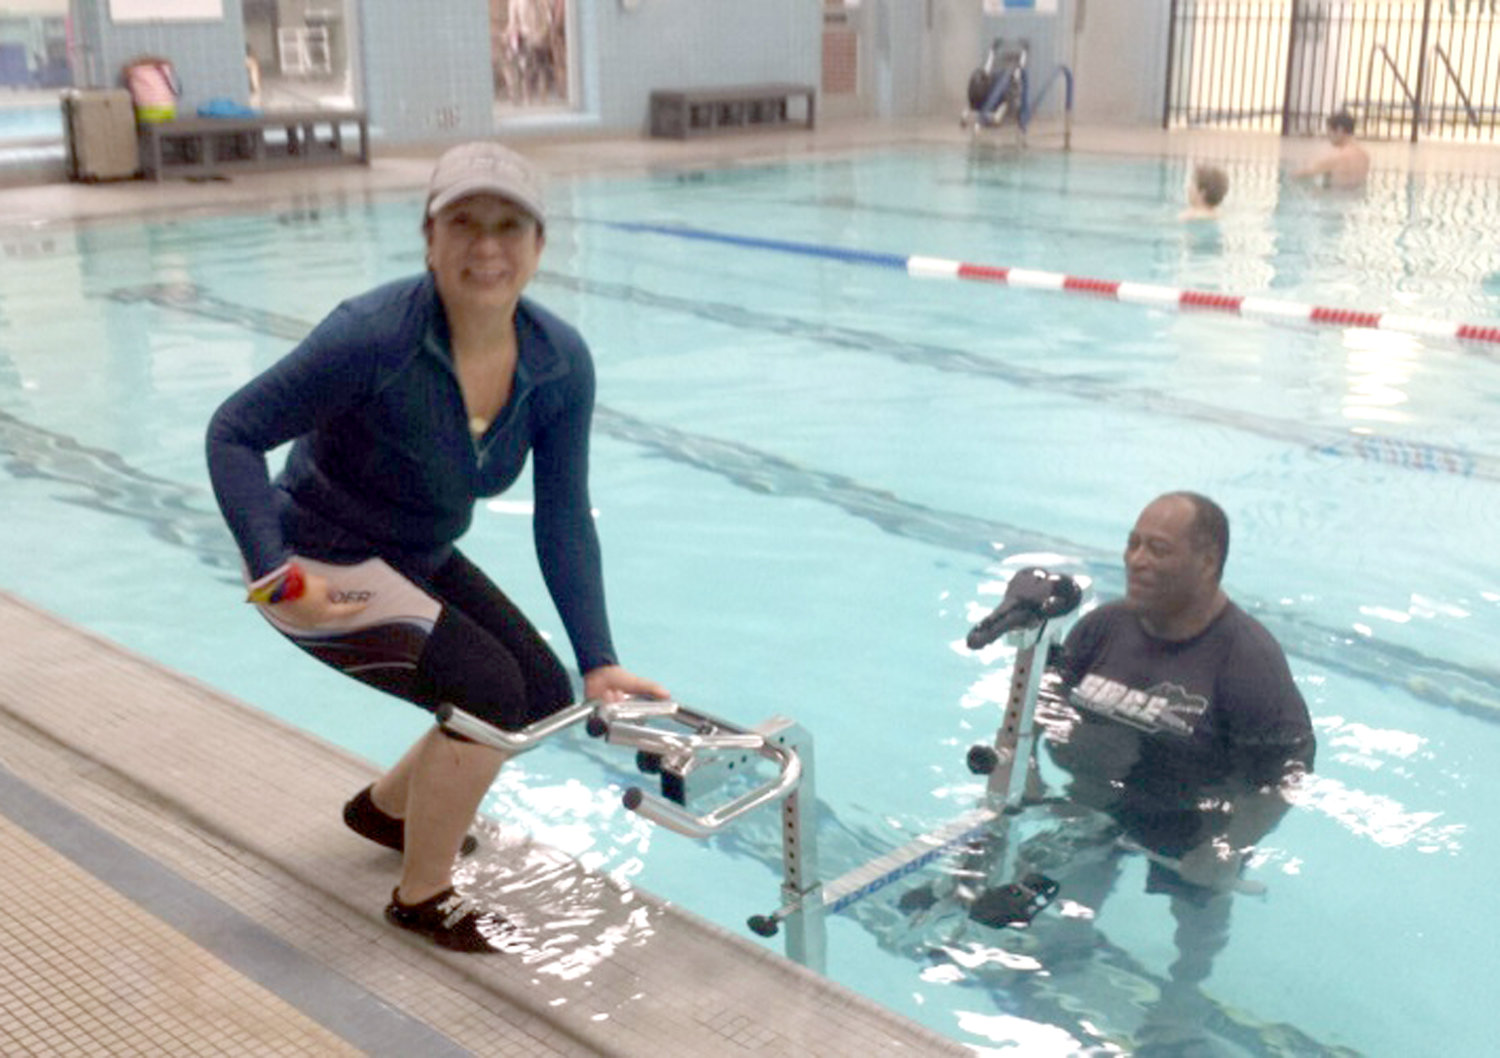 MAKING WAVES — The Rome Family YMCA shows off one of its new hydro spin cycles at its 301 W. Bloomfield St. facility in this file photo.